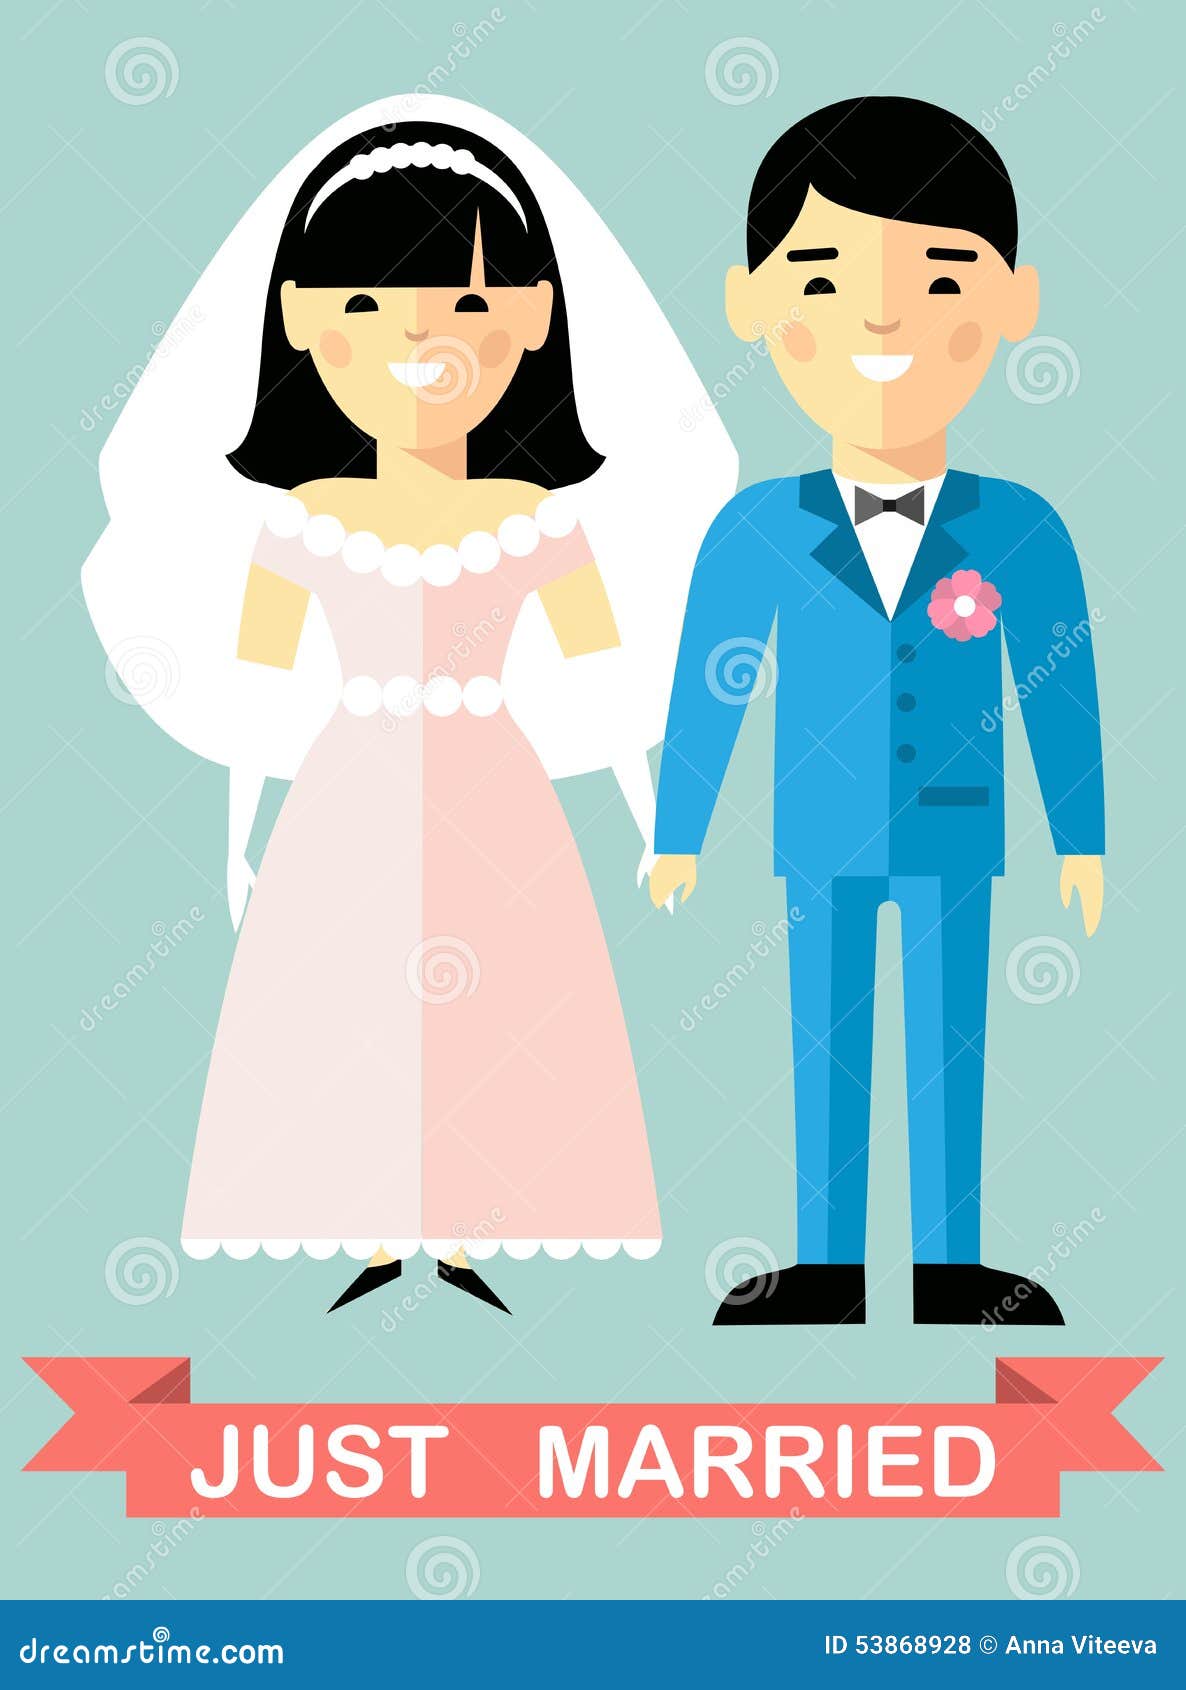 Vector Illustration Of A Married Asian Couple People In